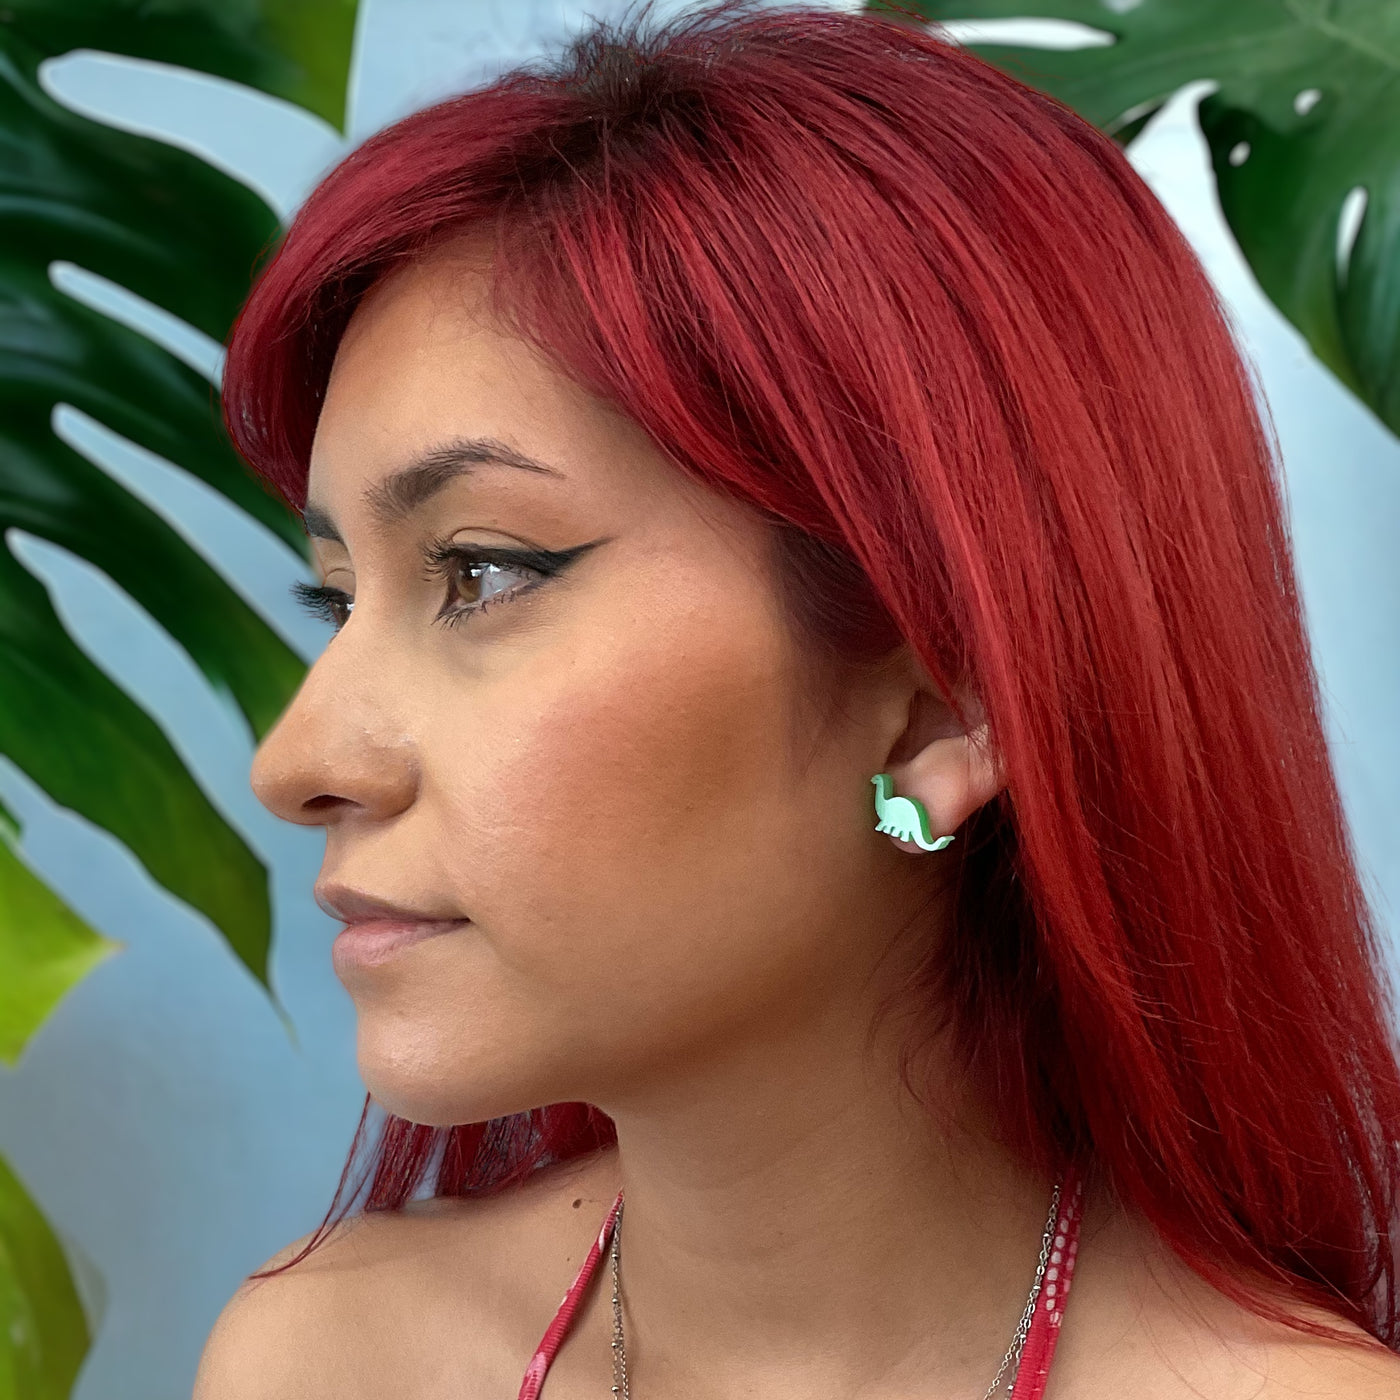 An alternatively styled model with bright red hair wears a plastic pearl green Brontosaurus dinosaur earring on her ear.